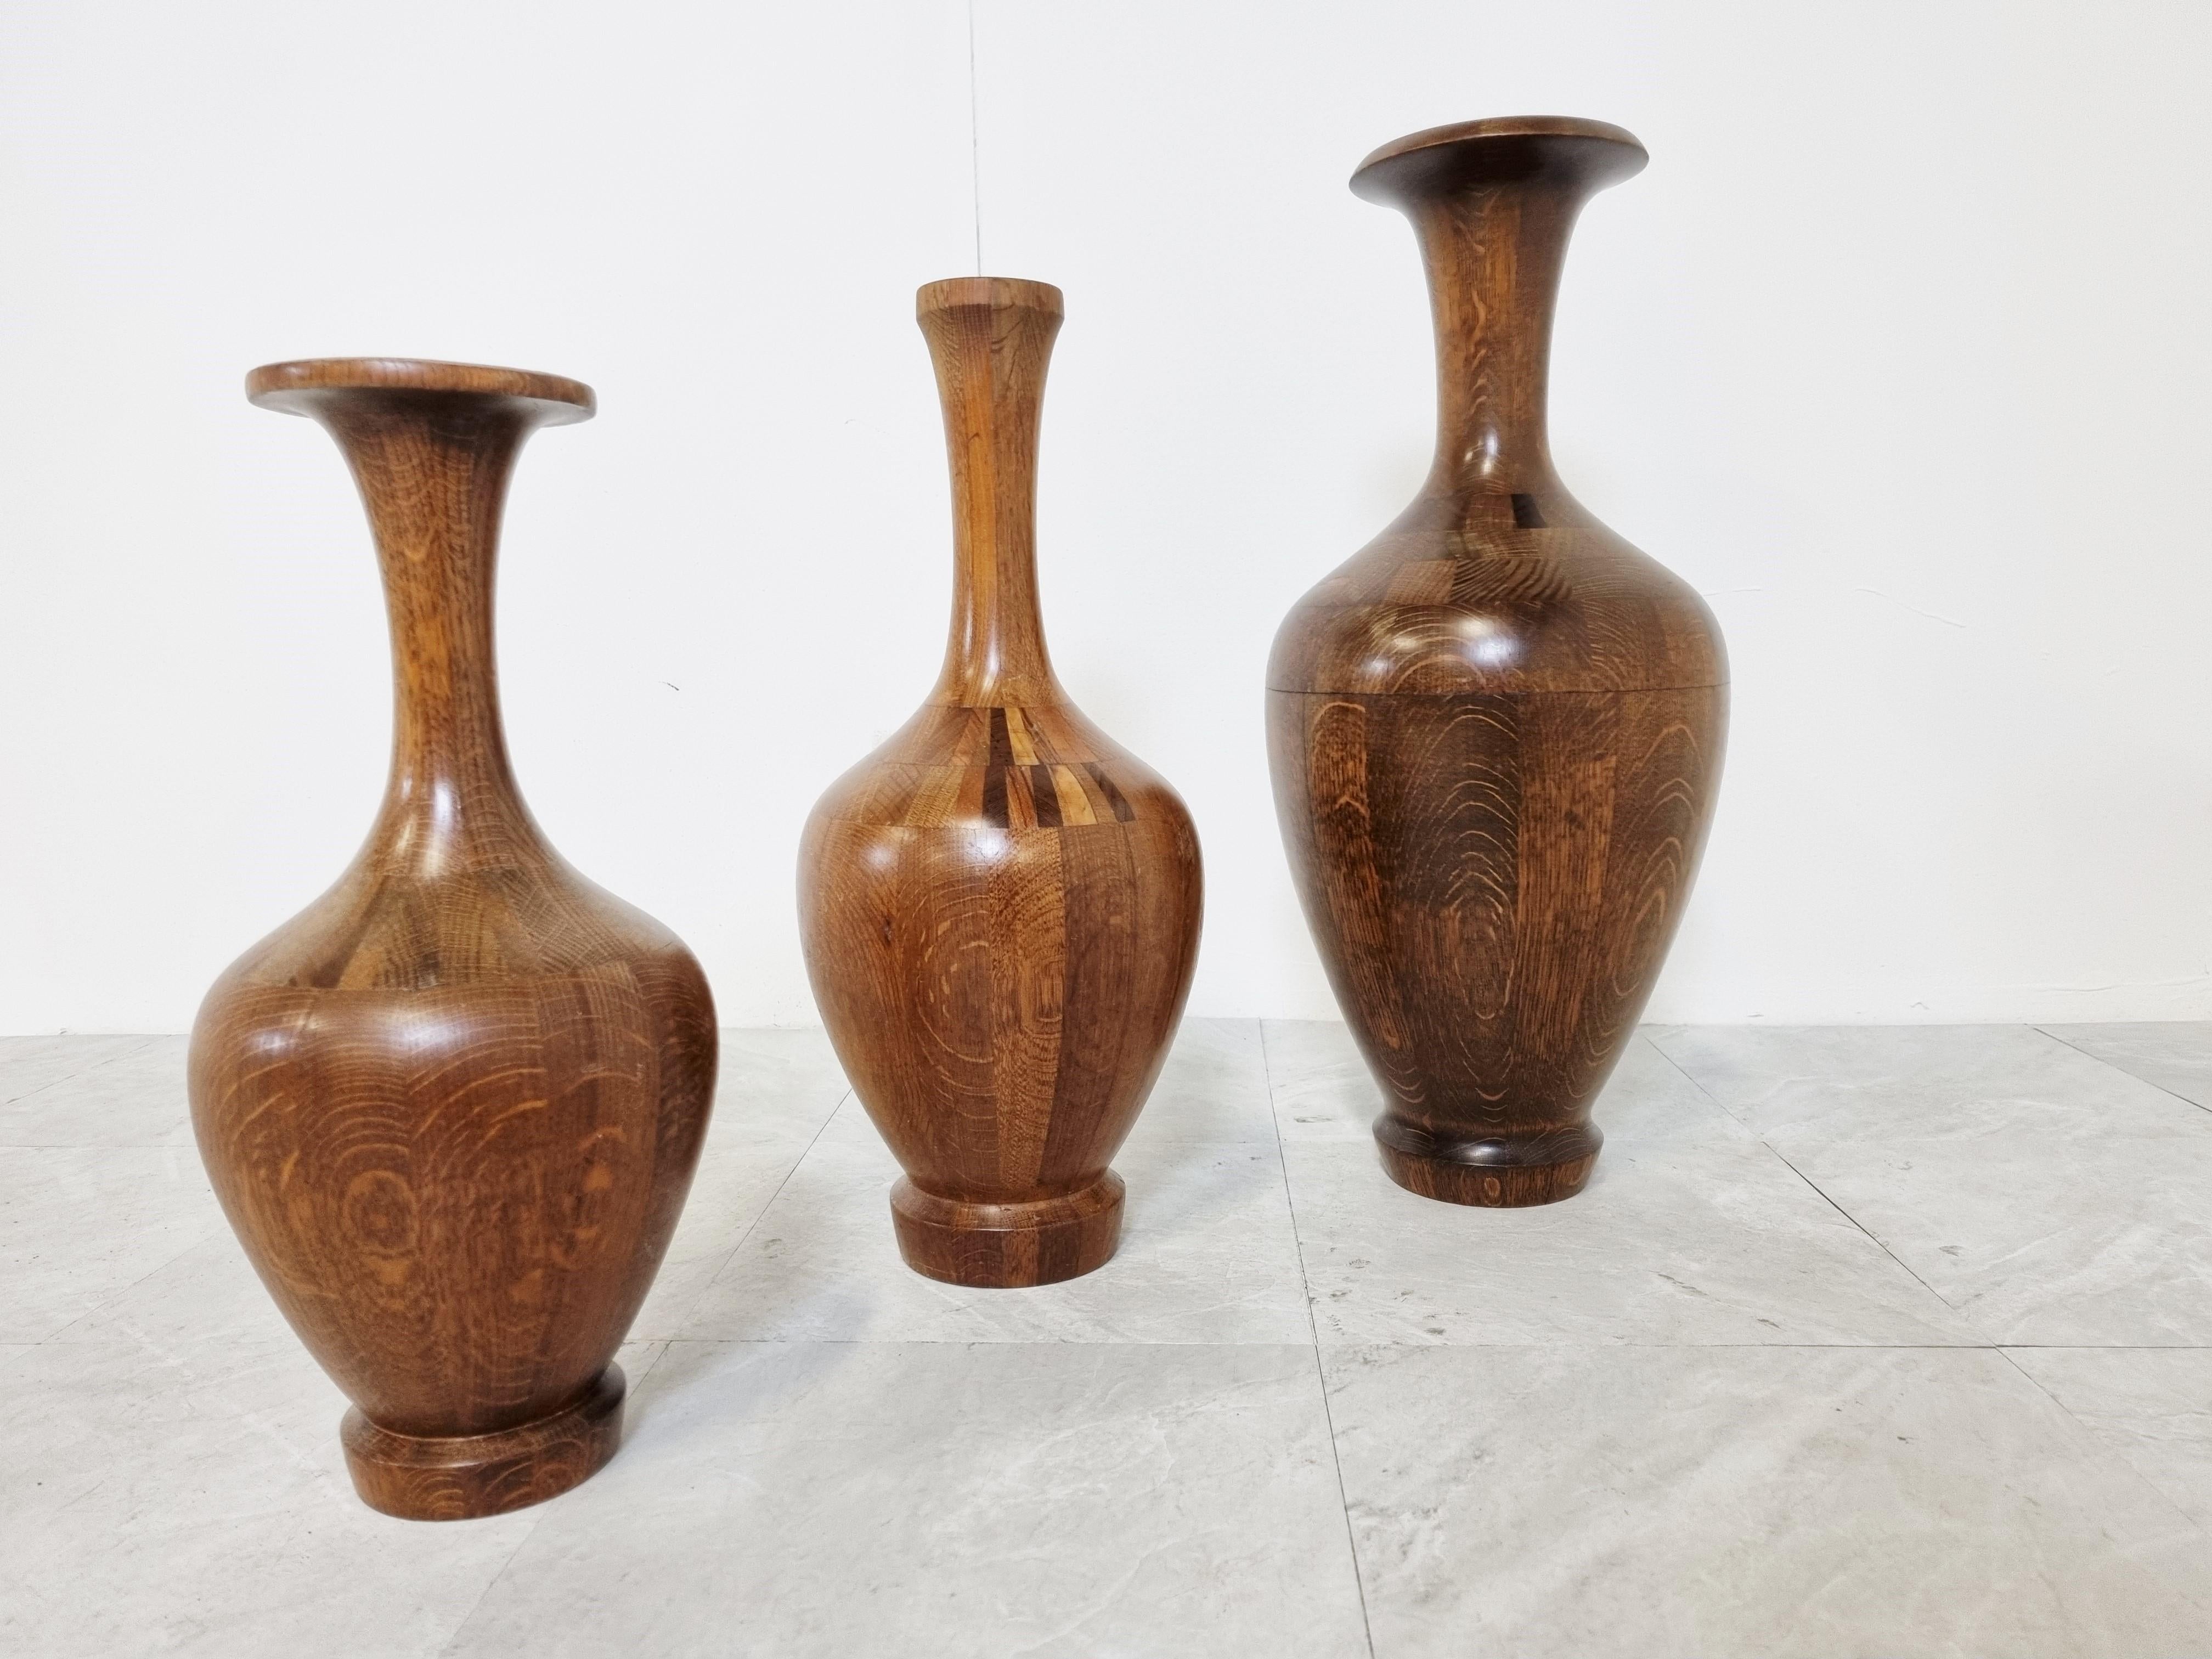 Set of 3 elegant vases by Maurice Bonami, commonly attributed to Decoene.

Real craftsmanship was needed to create these beautiful vases consisting of different specimens of wood.

Good condition with normal age related wear.

Sold as a set